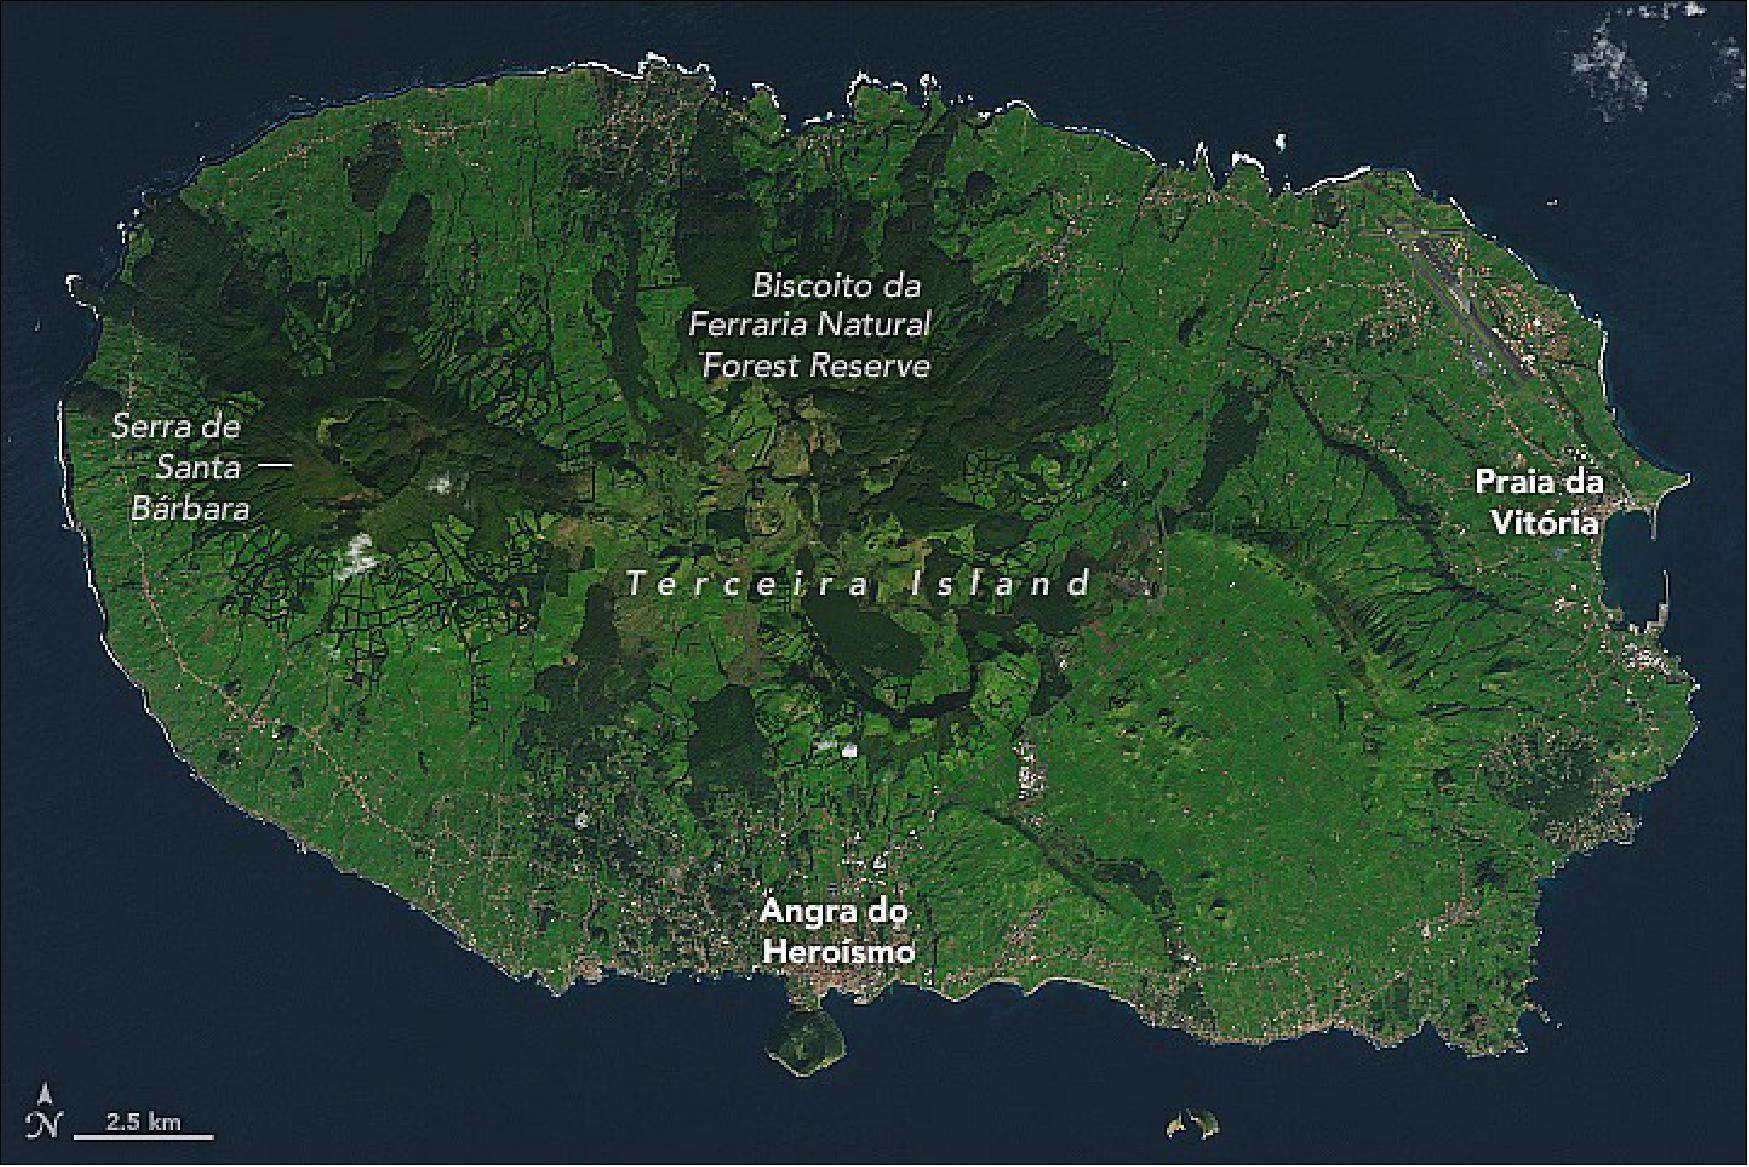 Figure 27: The rift passes through the island of Terceira, shown in the above image, which was acquired on January 3, 2020, by the Operational Land Imager (OLI) on Landsat 8. This 400 km2 island in the central Azores first formed about 400,000 years ago. At the western end, Serra de Santa Bárbara rises to the island’s highest point at 1,021 meters (3,350 feet) above sea level (image credit: NASA Earth Observatory images by Lauren Dauphin, using Landsat data from the U.S. Geological Survey. Story by Sara E. Pratt)